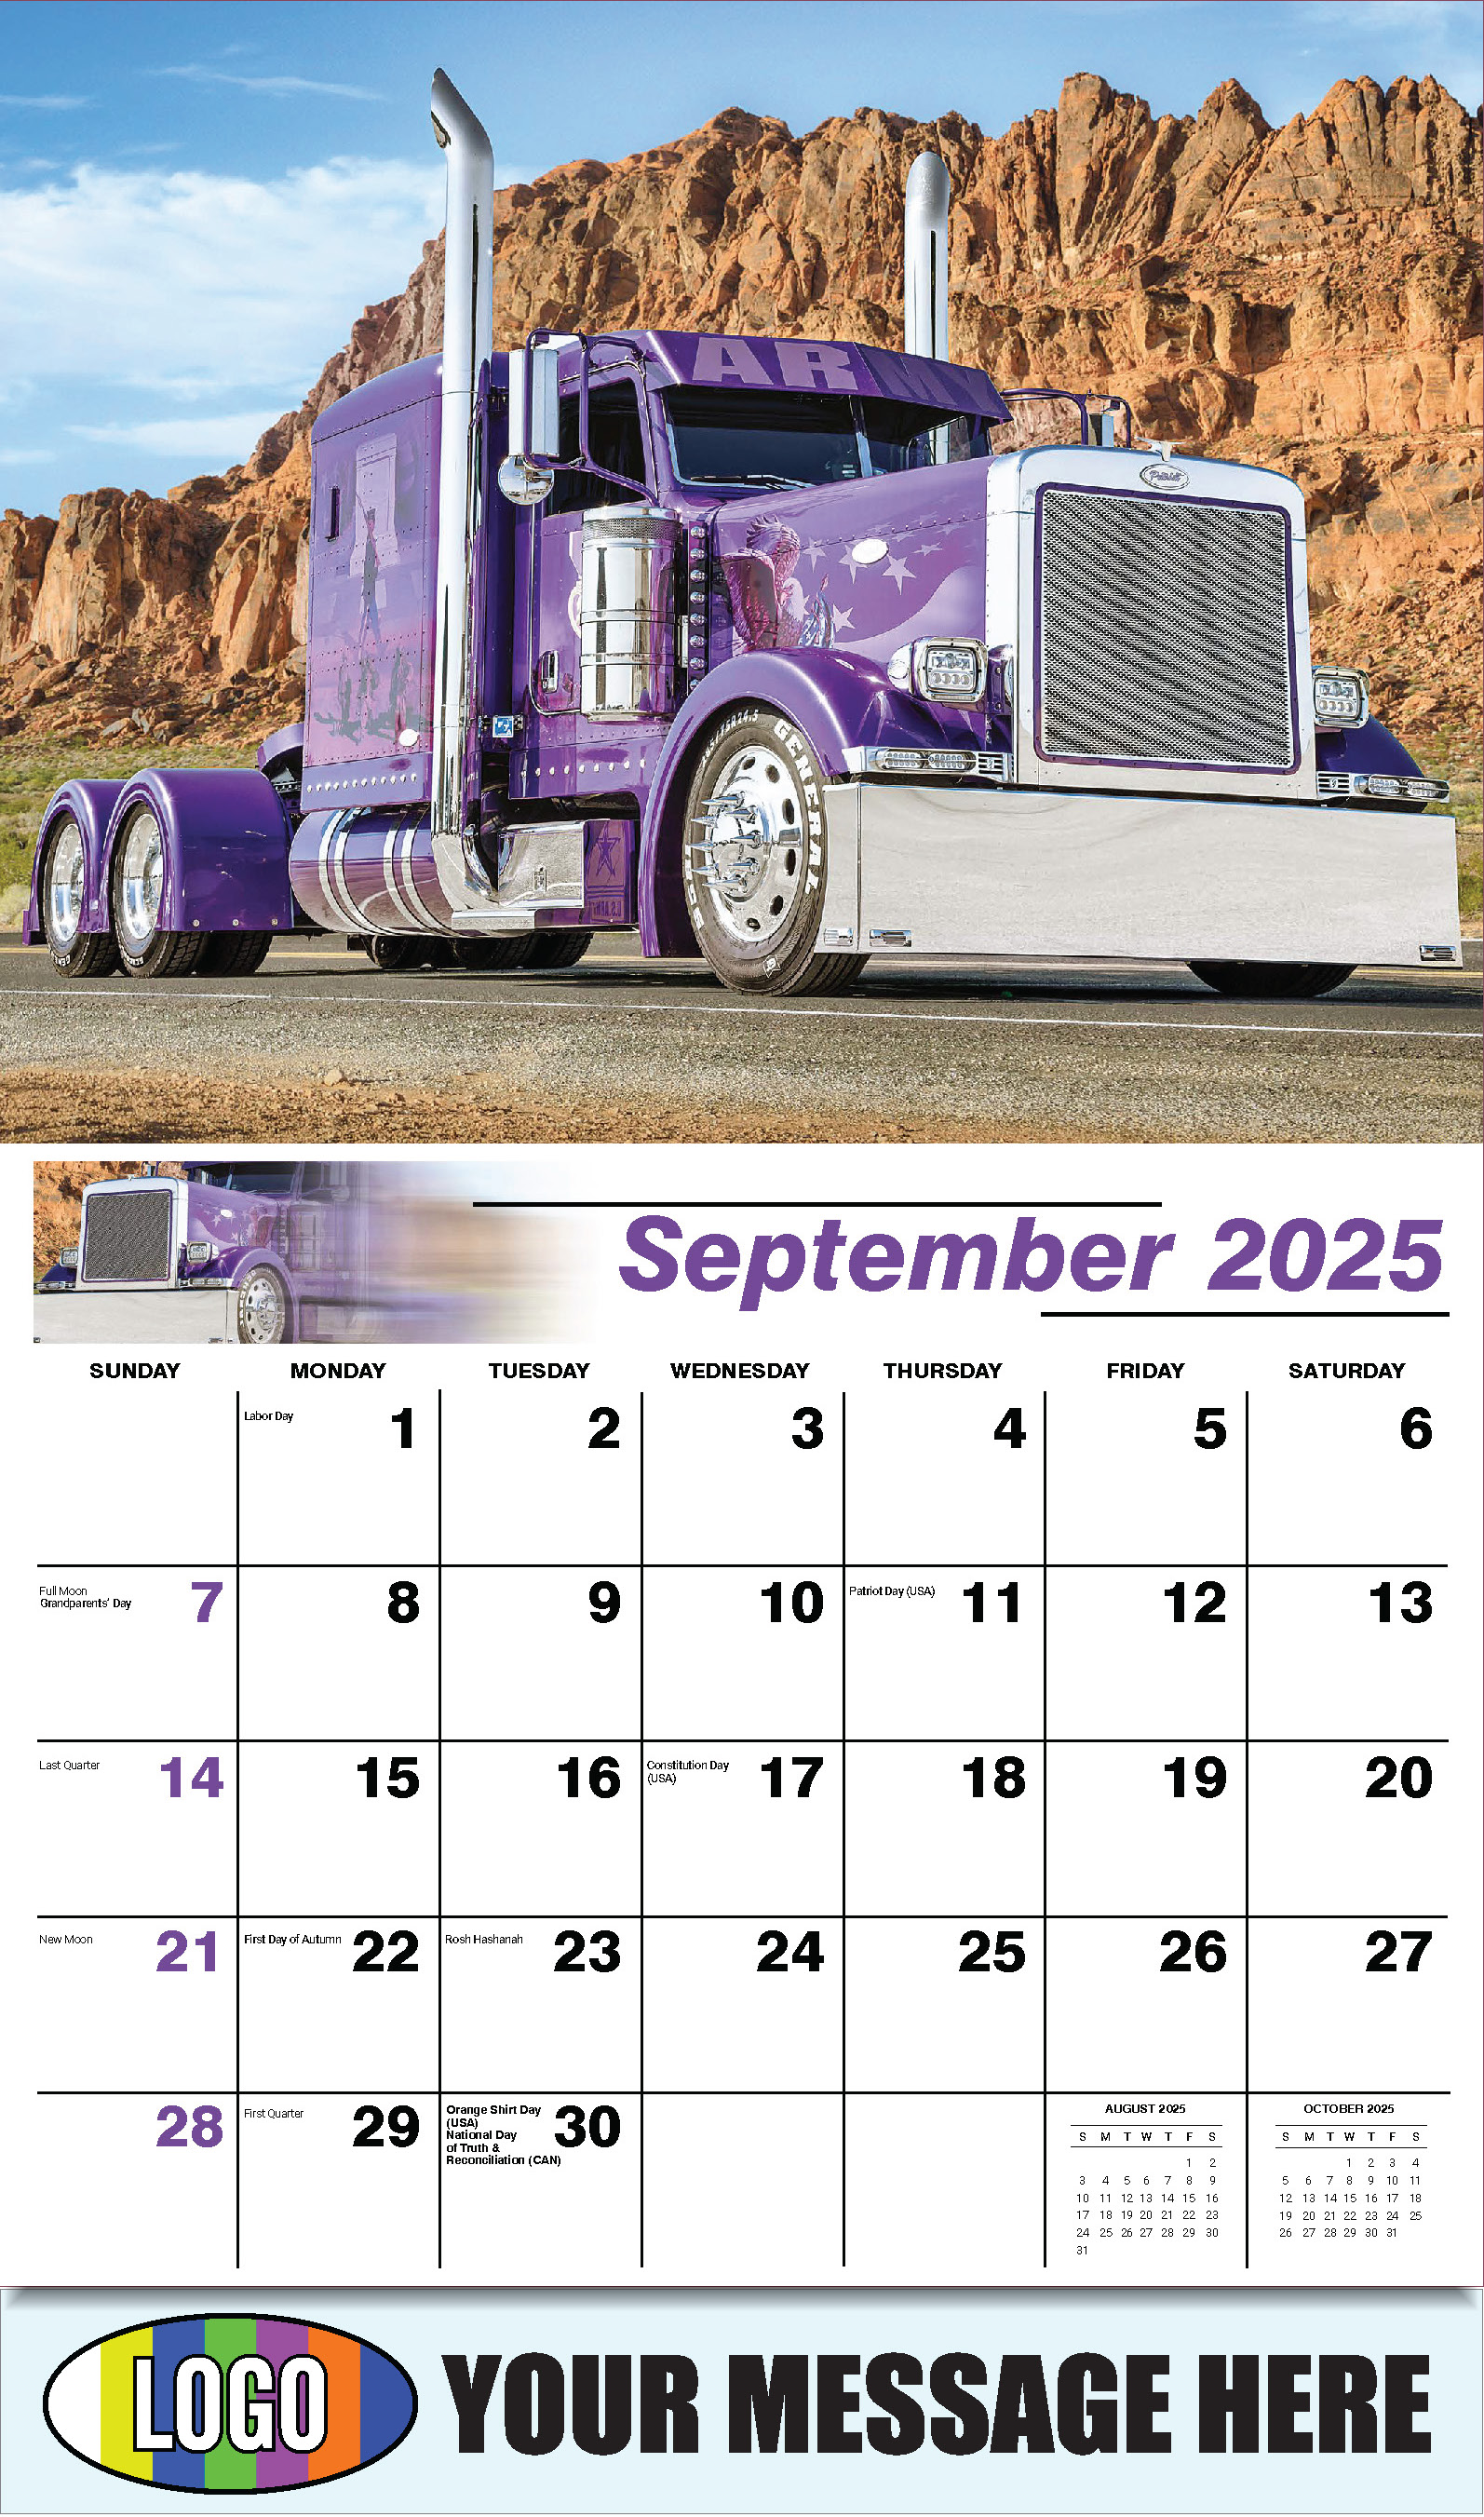 Kings of the Road 2025 Automotive Business Promotional Calendar - September